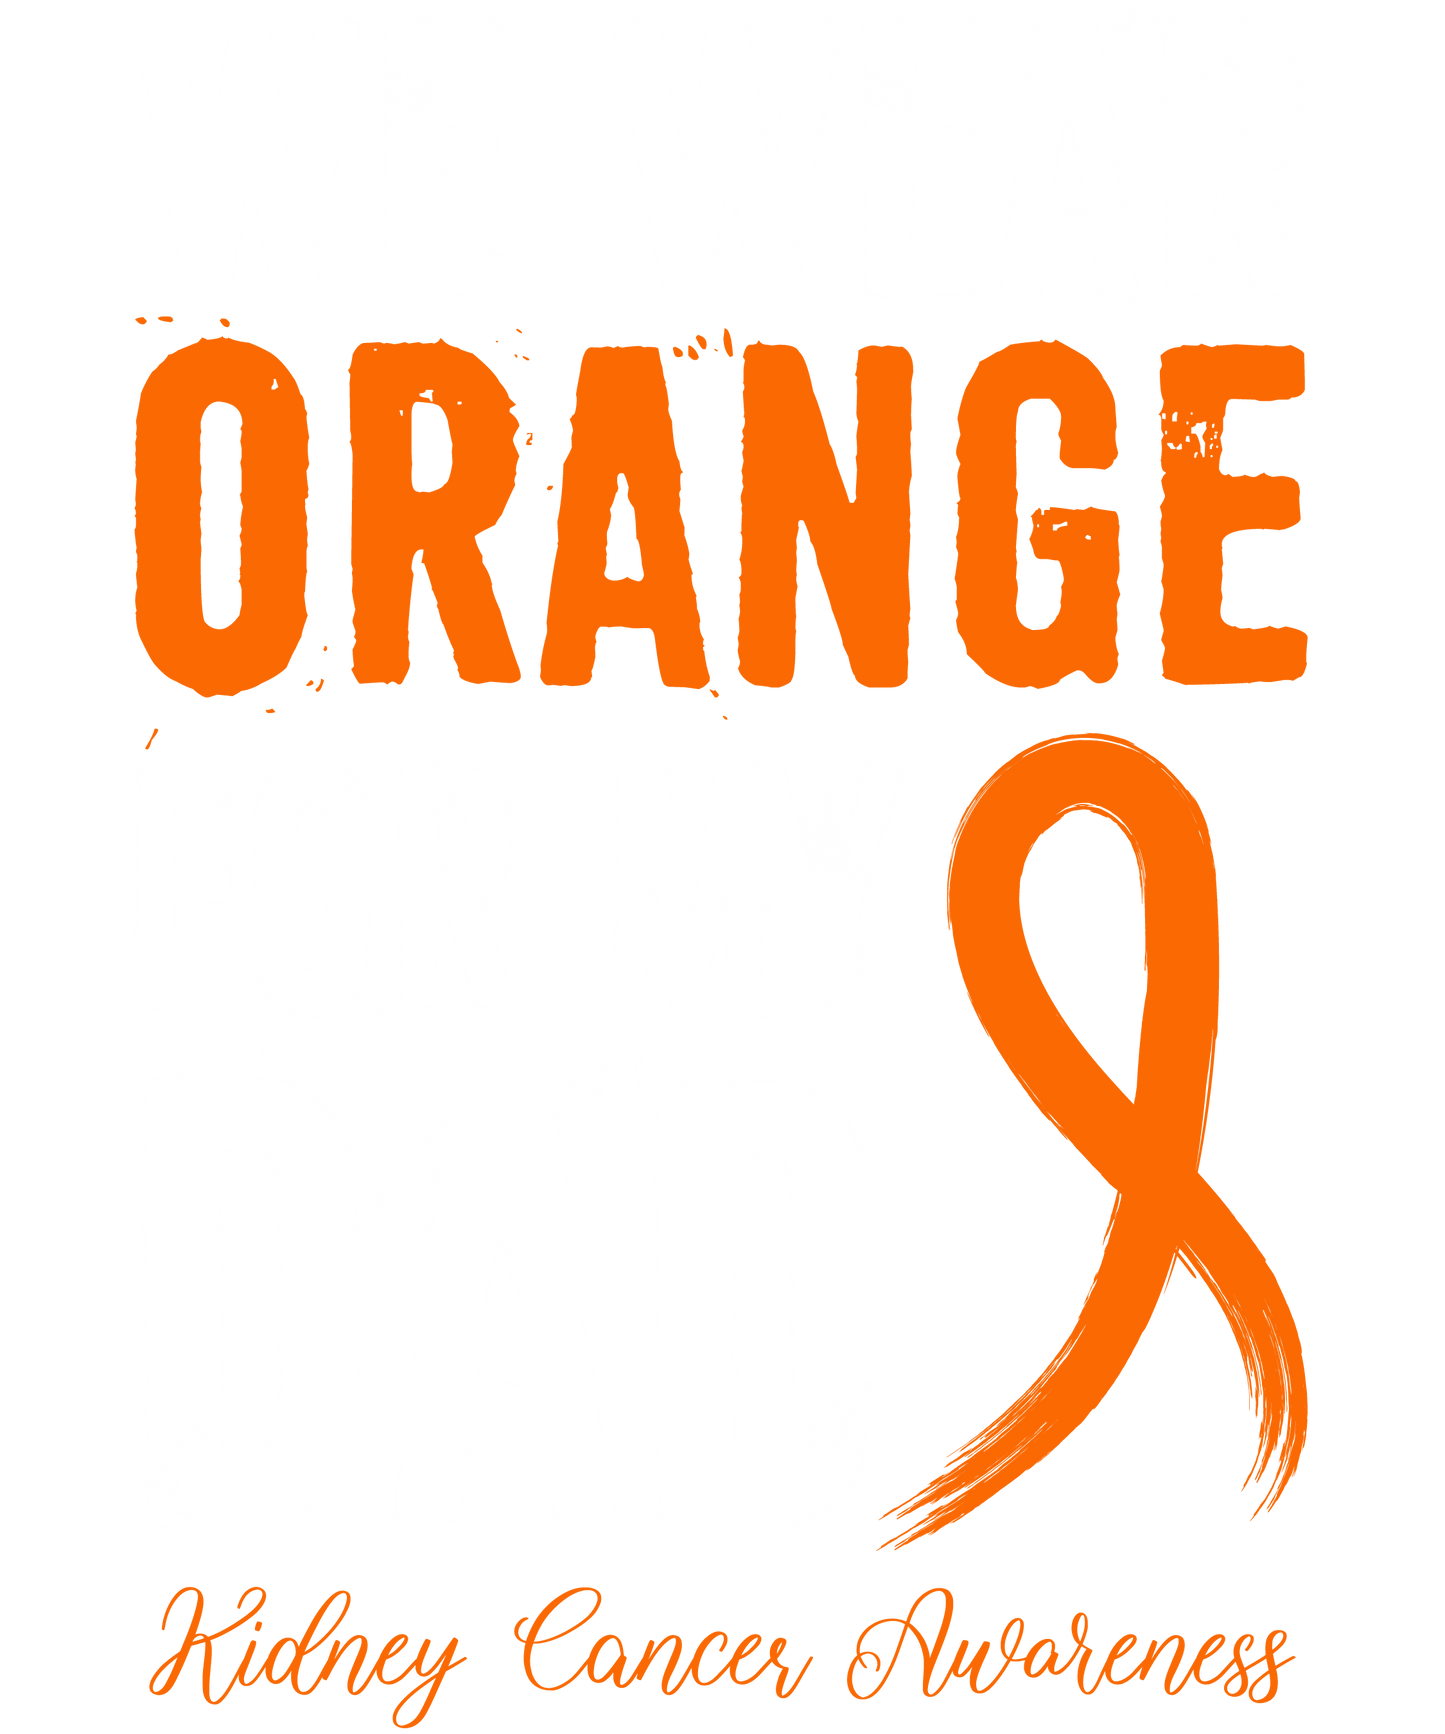 KIDNEY CANCER- FOR MY DAD